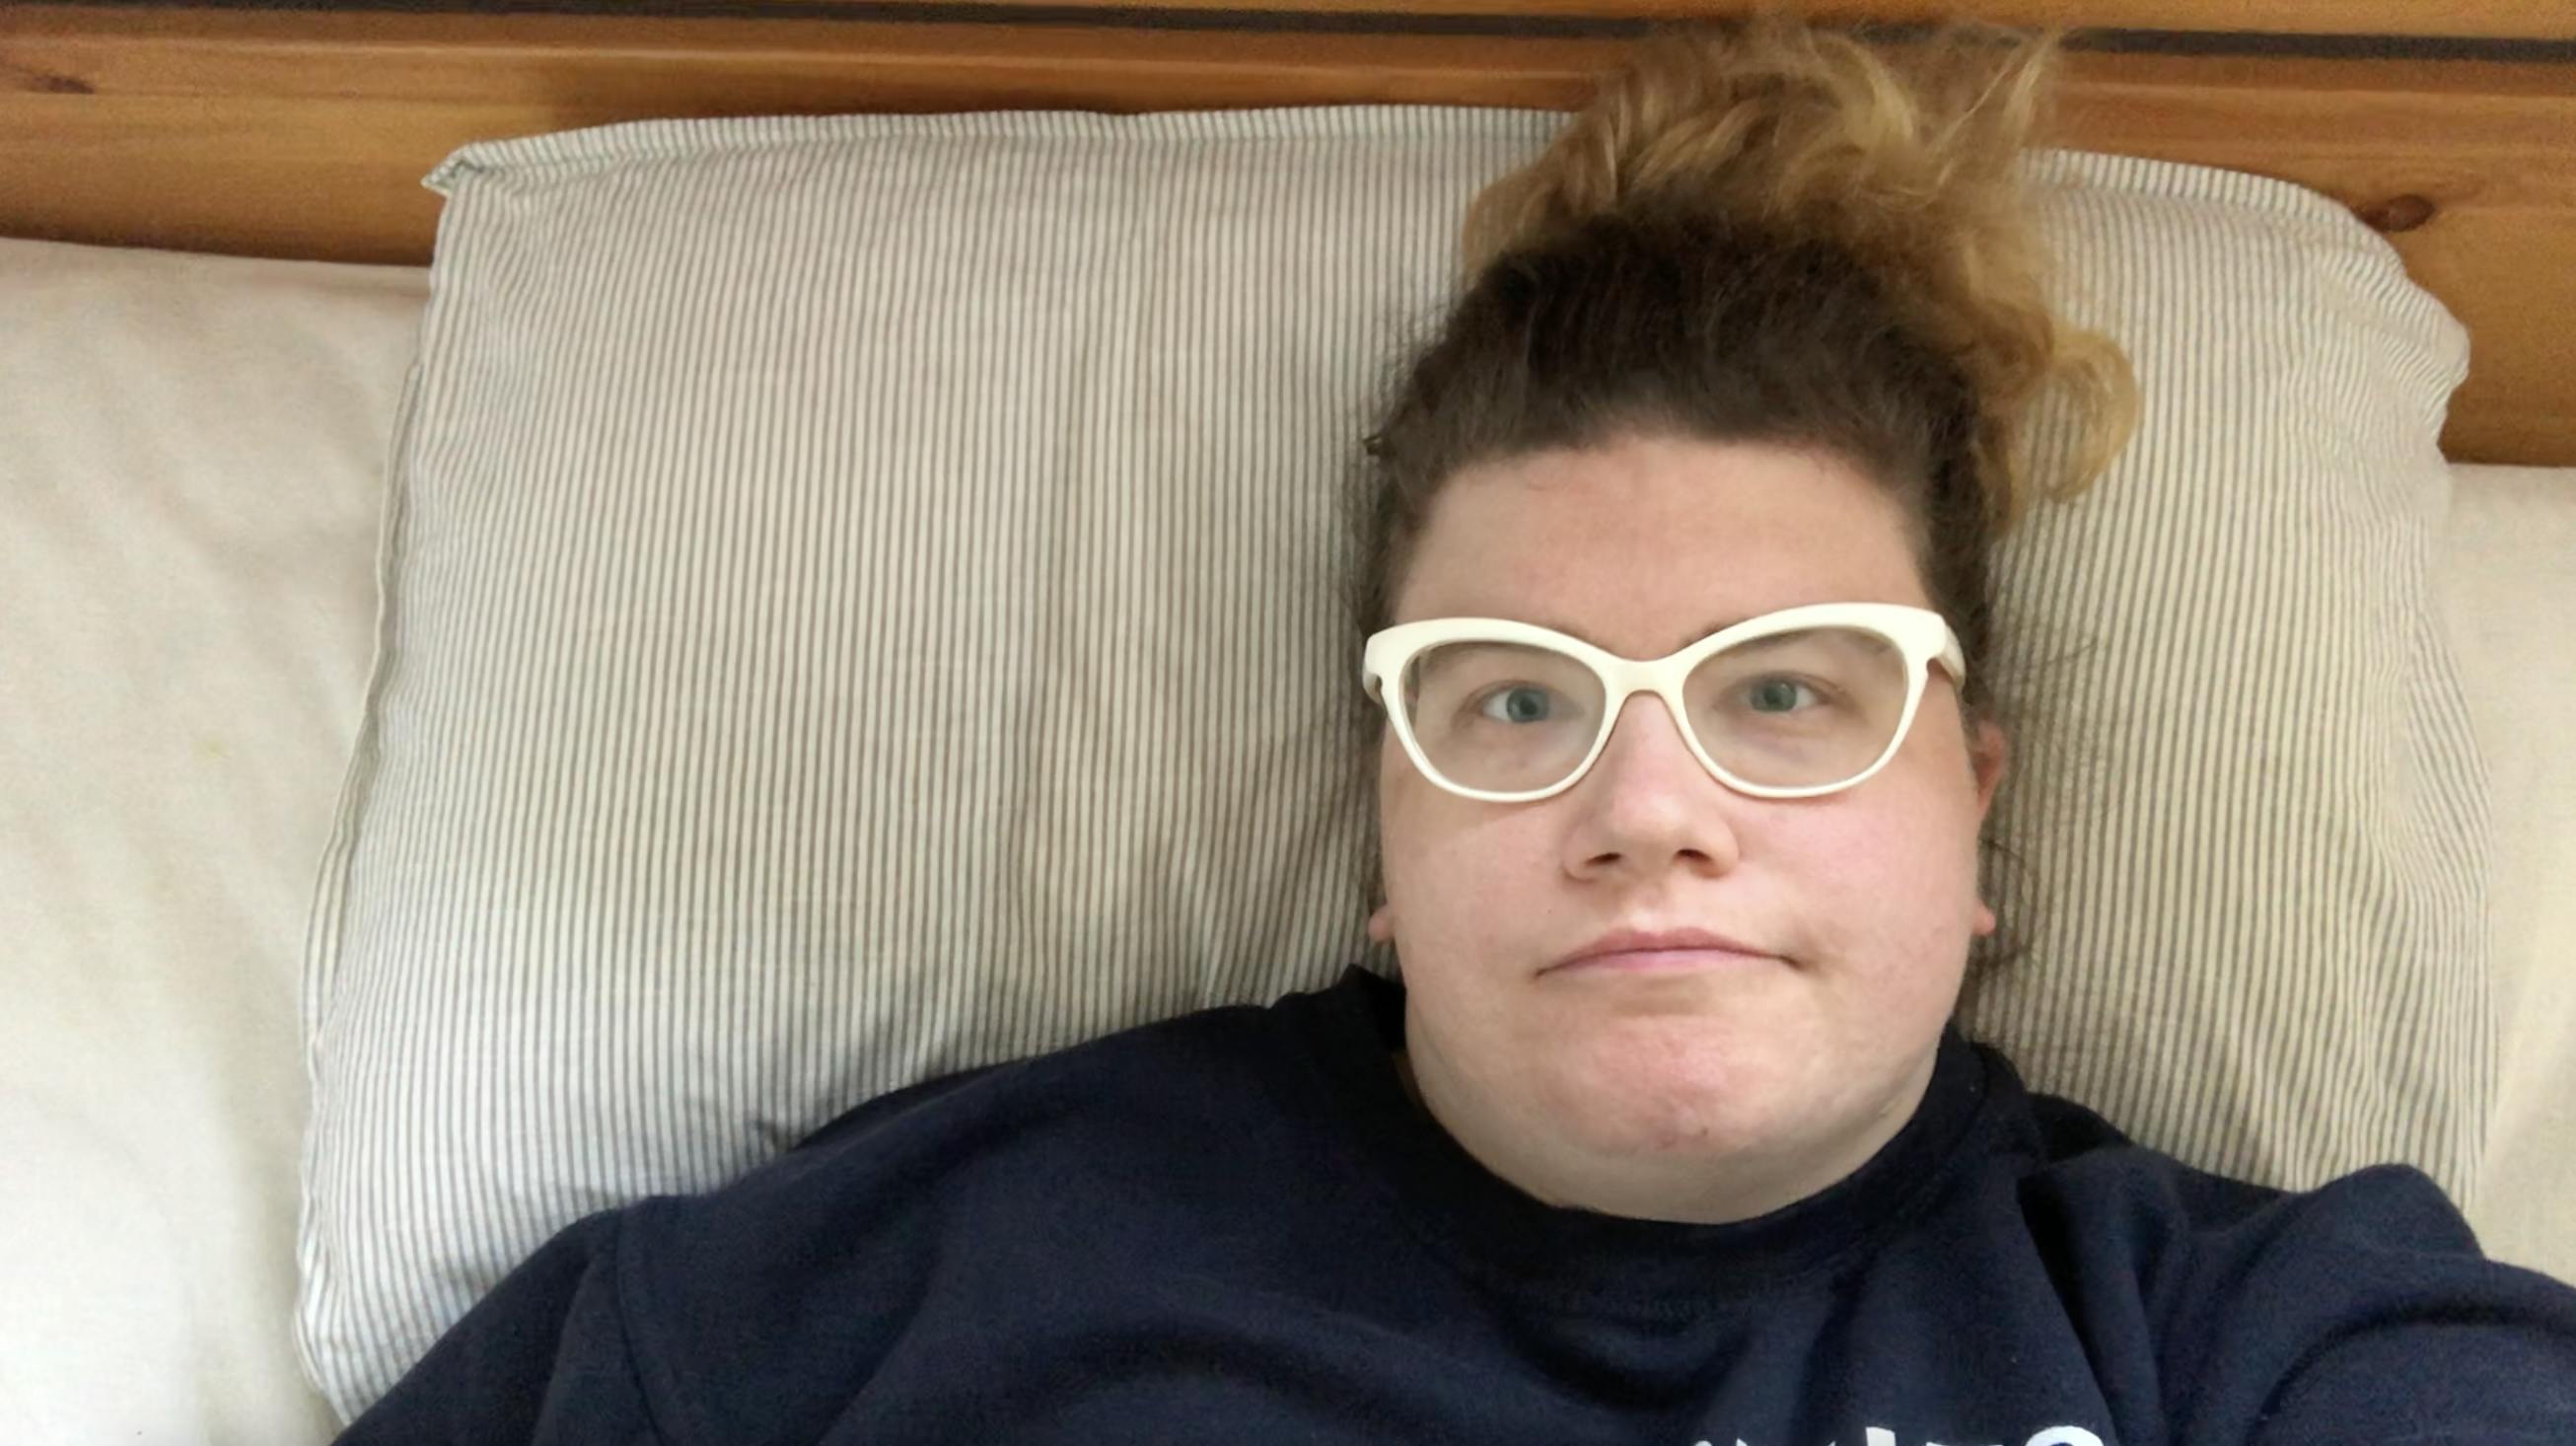 white woman with white glasses and blonde hair wearing a blue sweatshirt lying on her back in bed on a striped pillow and wooden bedframe